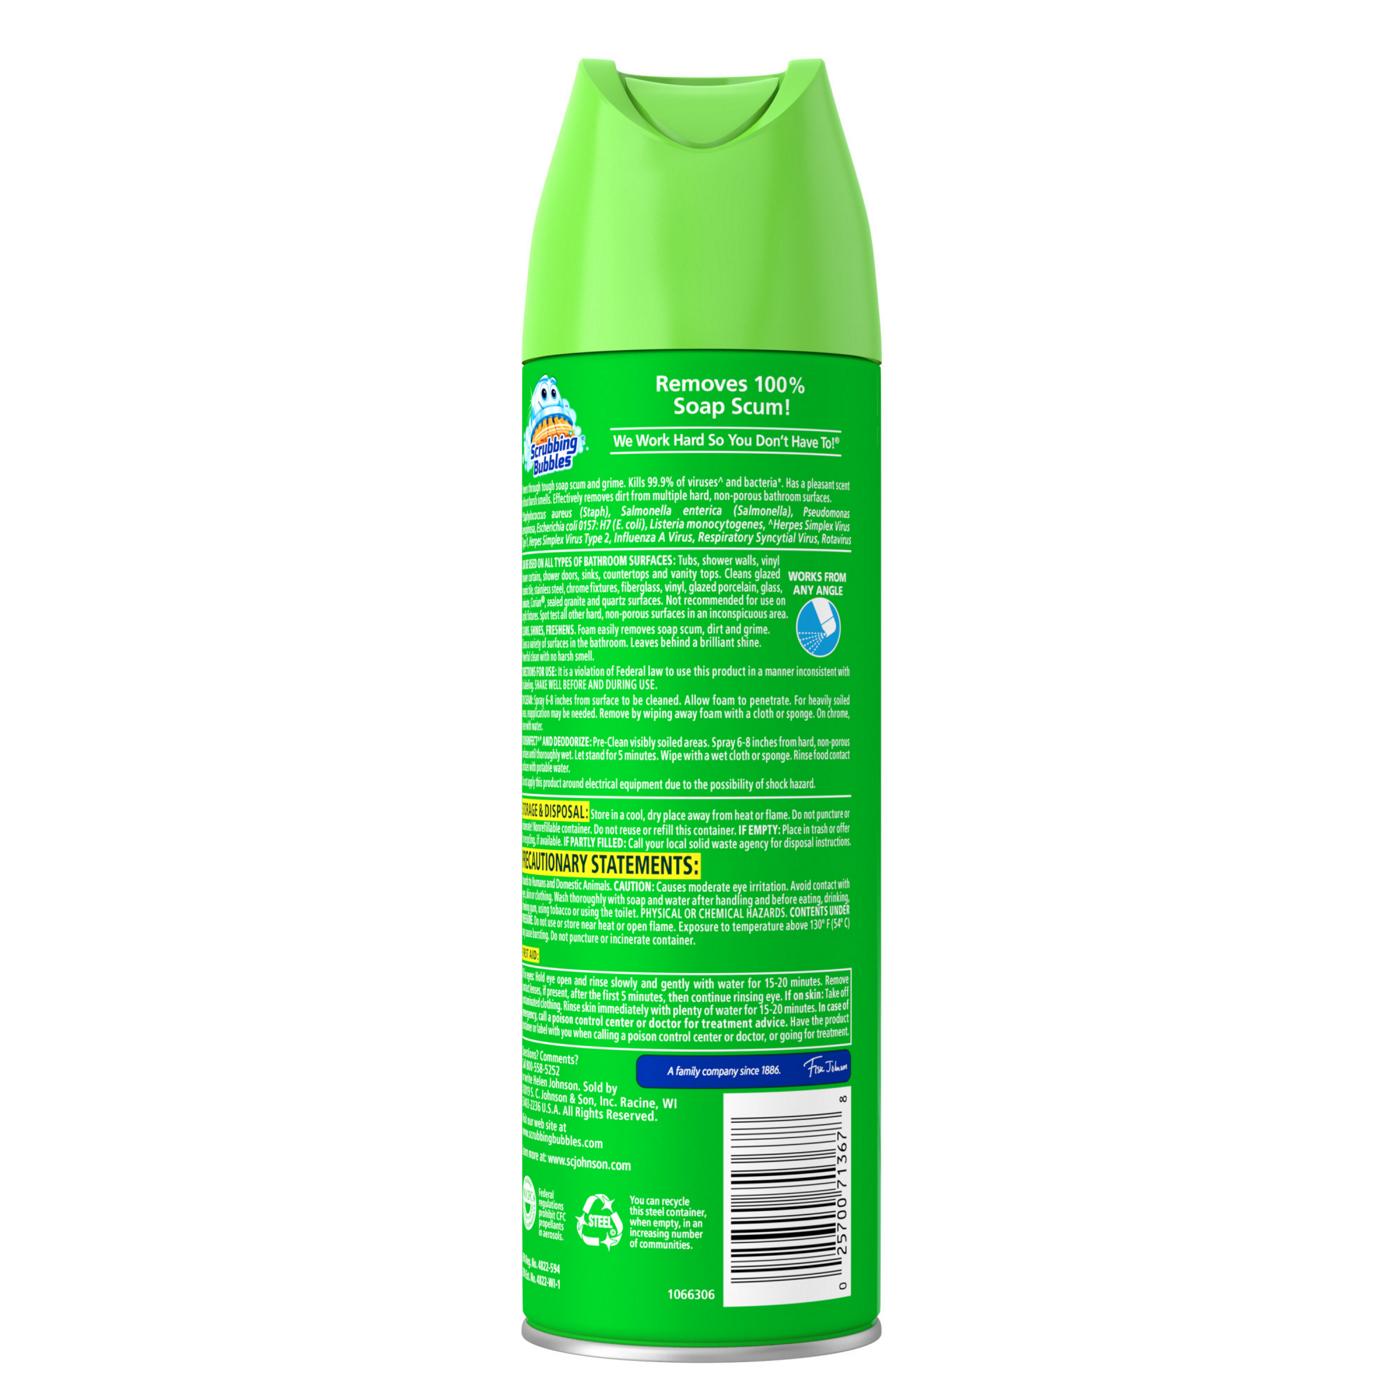 Scrubbing Bubbles Rainshower Scent Bathroom Cleaner; image 10 of 10